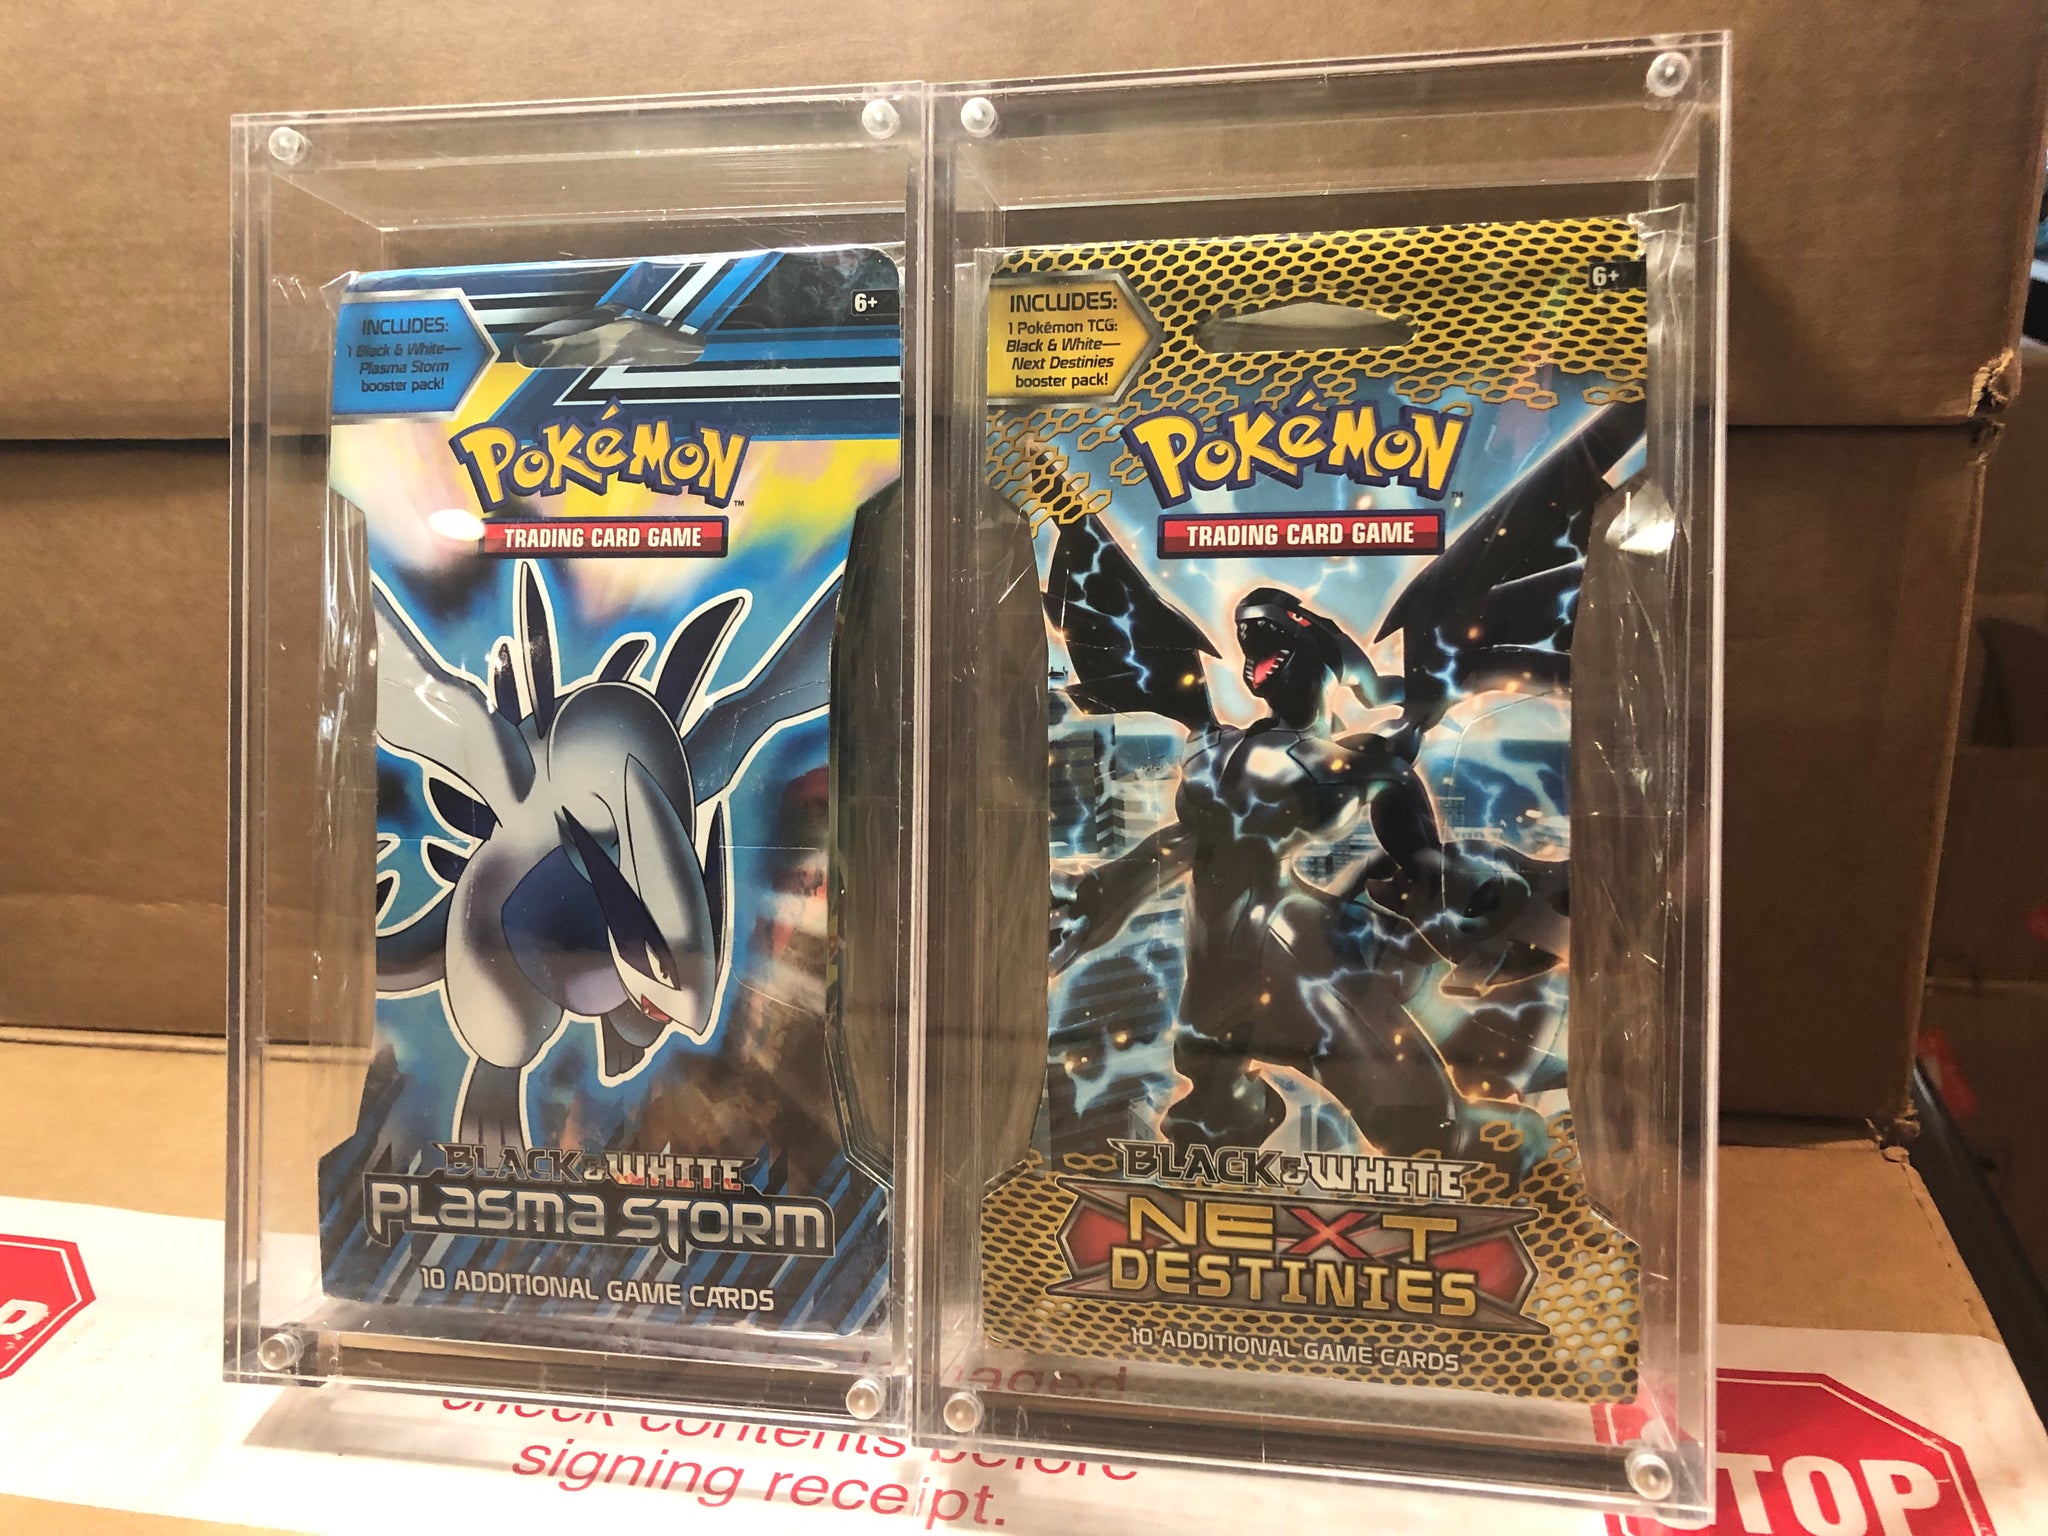 Sleeved Pack Acrylic Display Case – 763 Collectibles